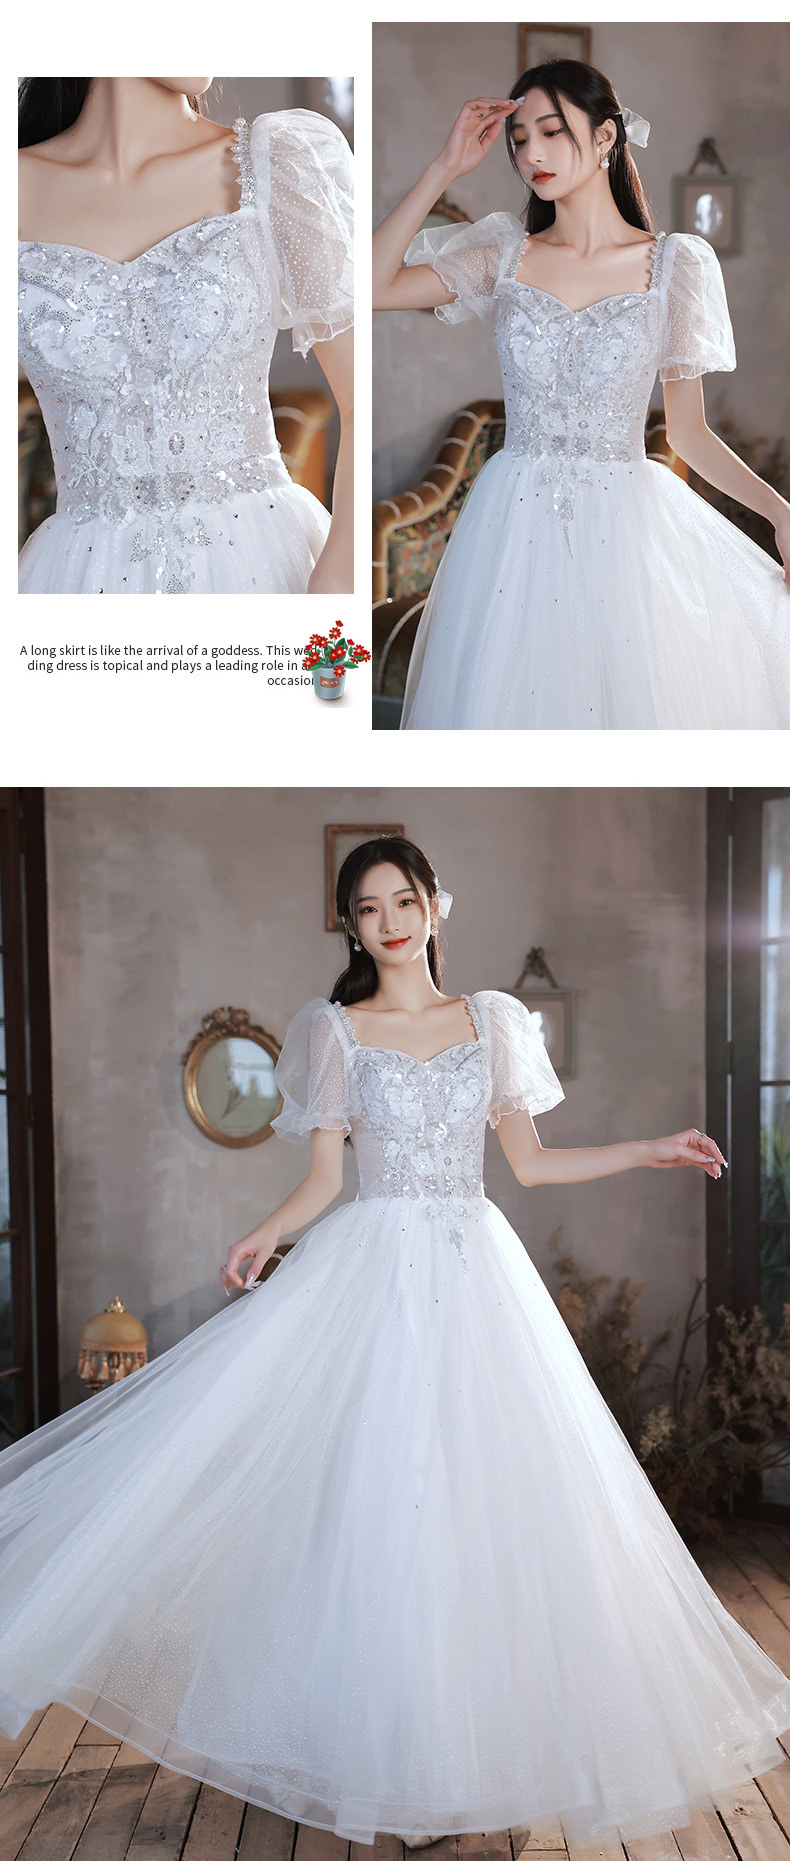 A-Line-White-Prom-Party-Ball-Gown-Embroidery-Homecoming-Long-Dress11.jpg